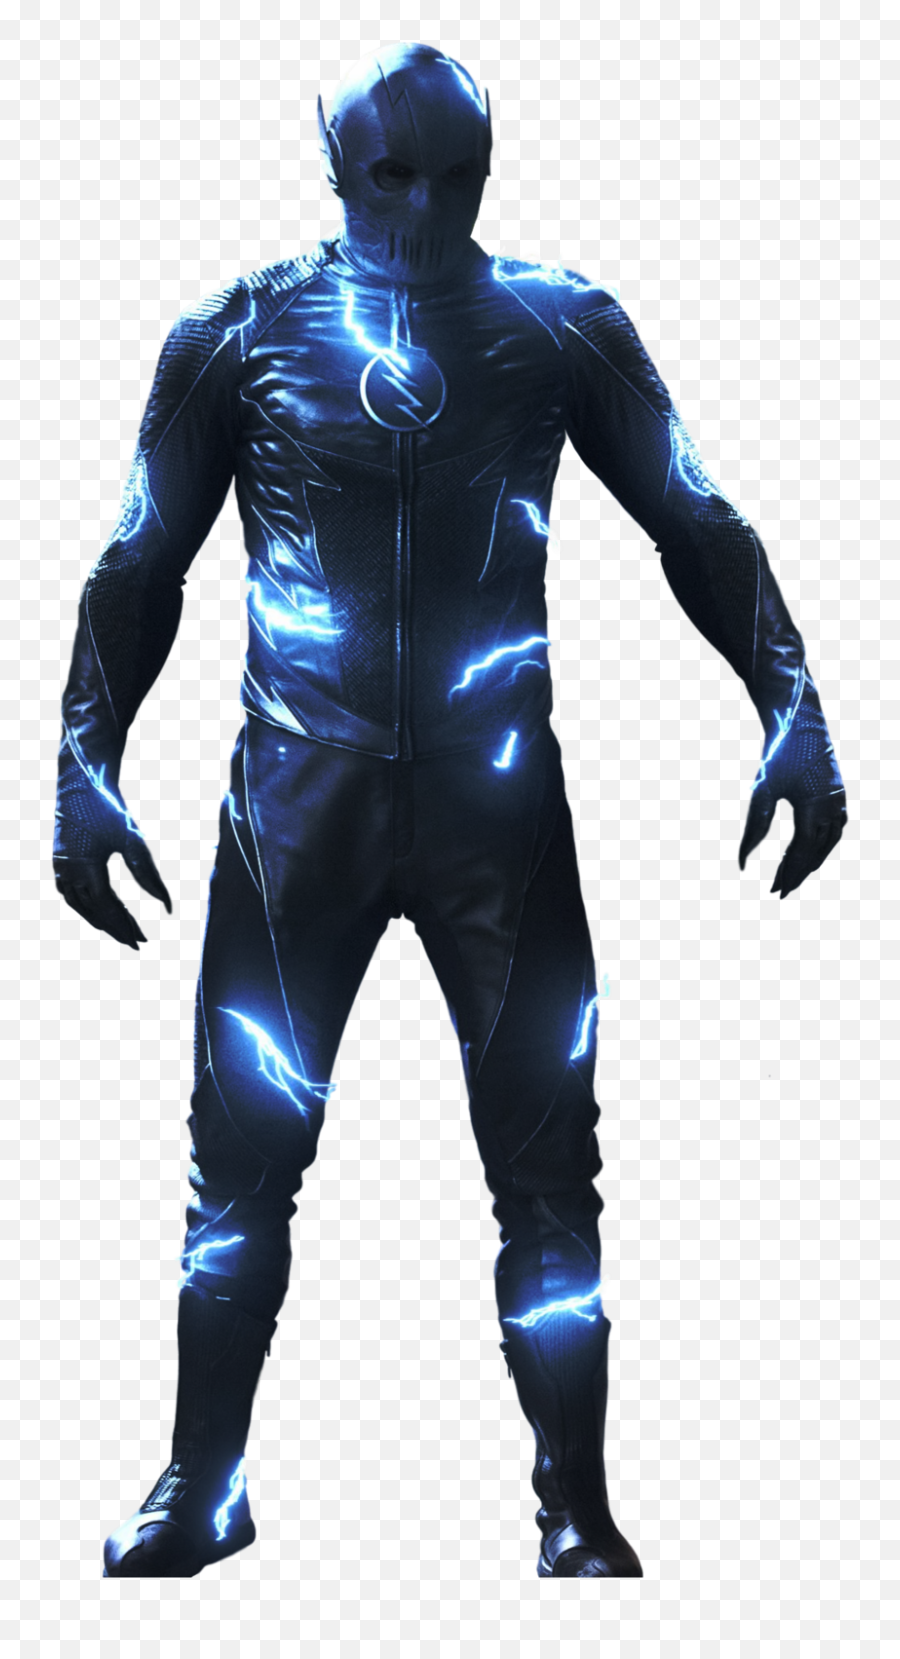 Zoom Flash Png 4 Image 1085625 - Png Images Pngio Zoom Full Body,The Flash Png